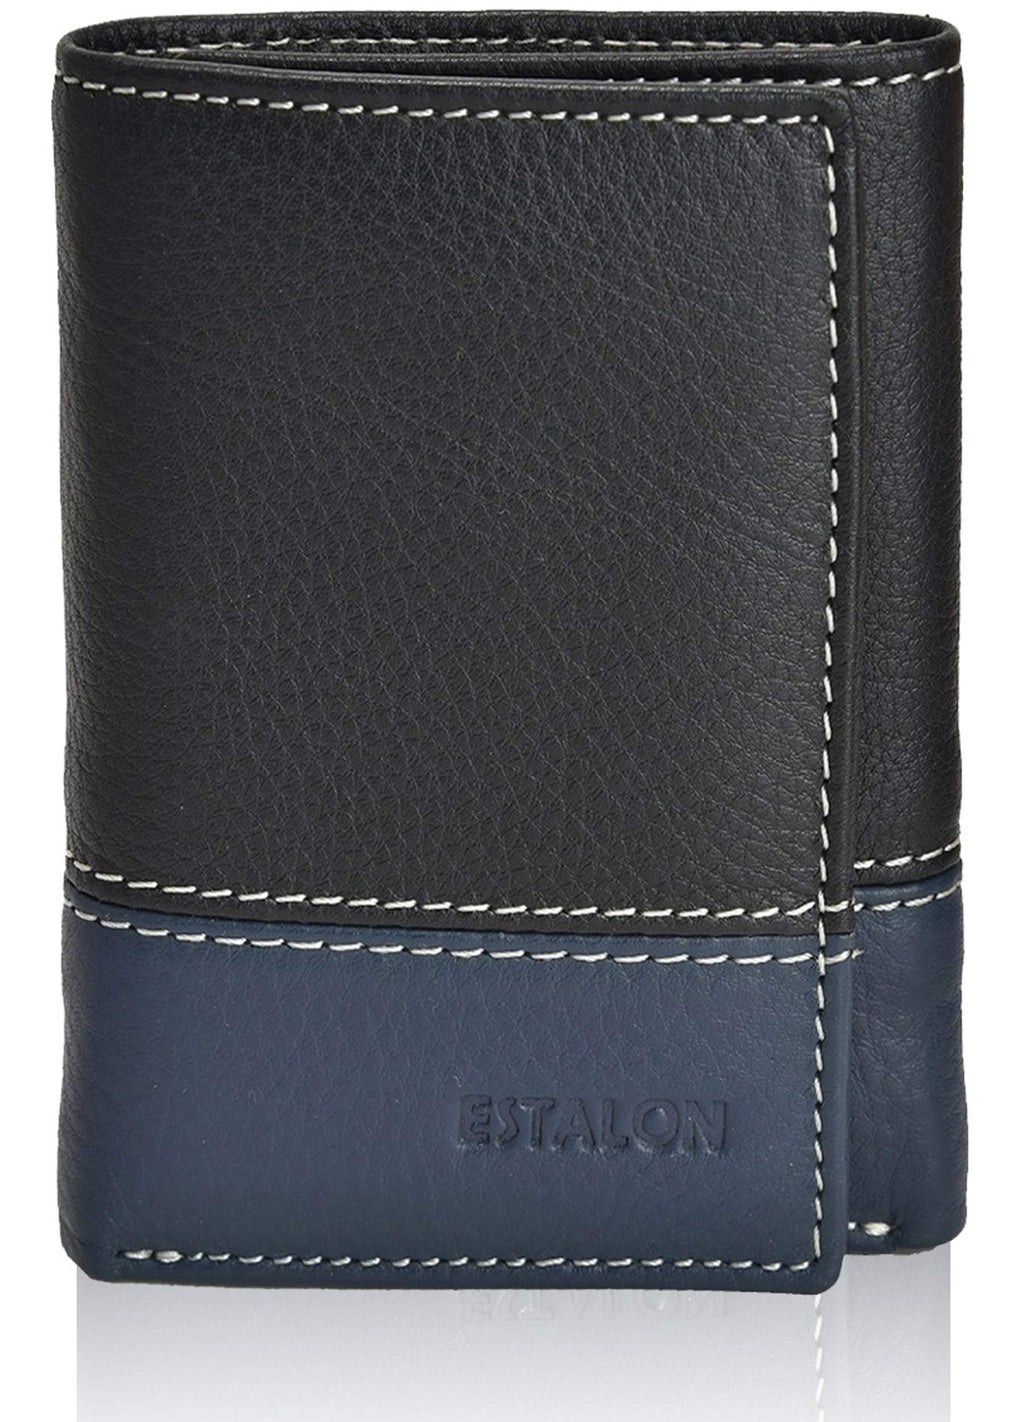 [Australia] - Real Leather Wallets for Men - RFID Blocking Slim Trifold Wallet with Card Slots Charcoal/Patriot 